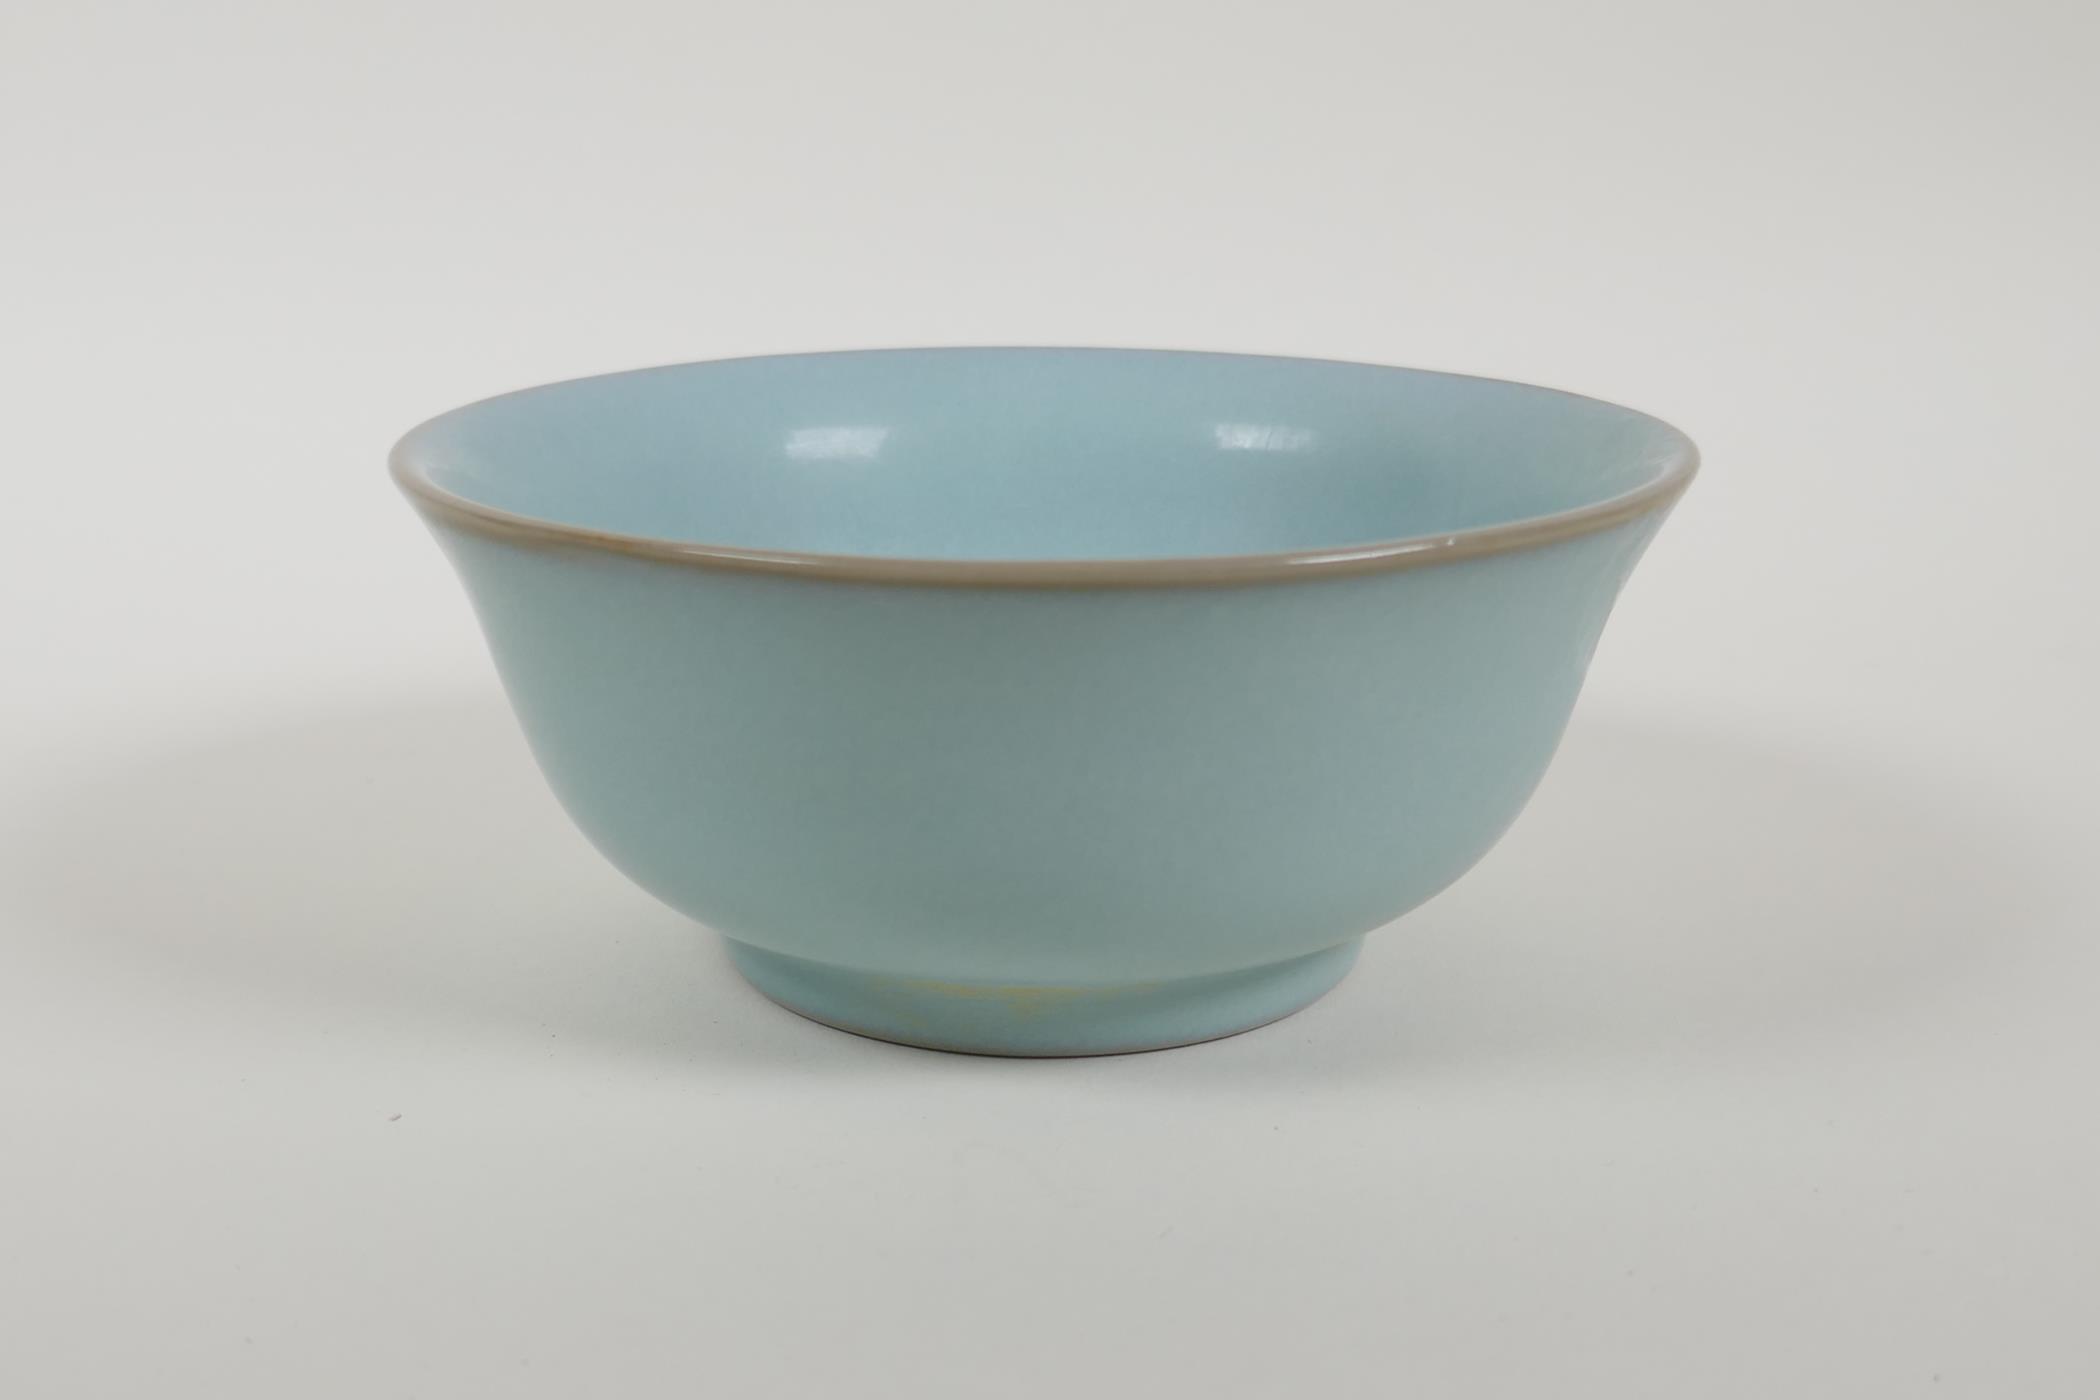 A Chinese celadon Ru ware style porcelain rice bowl, 5½" diameter - Image 3 of 6